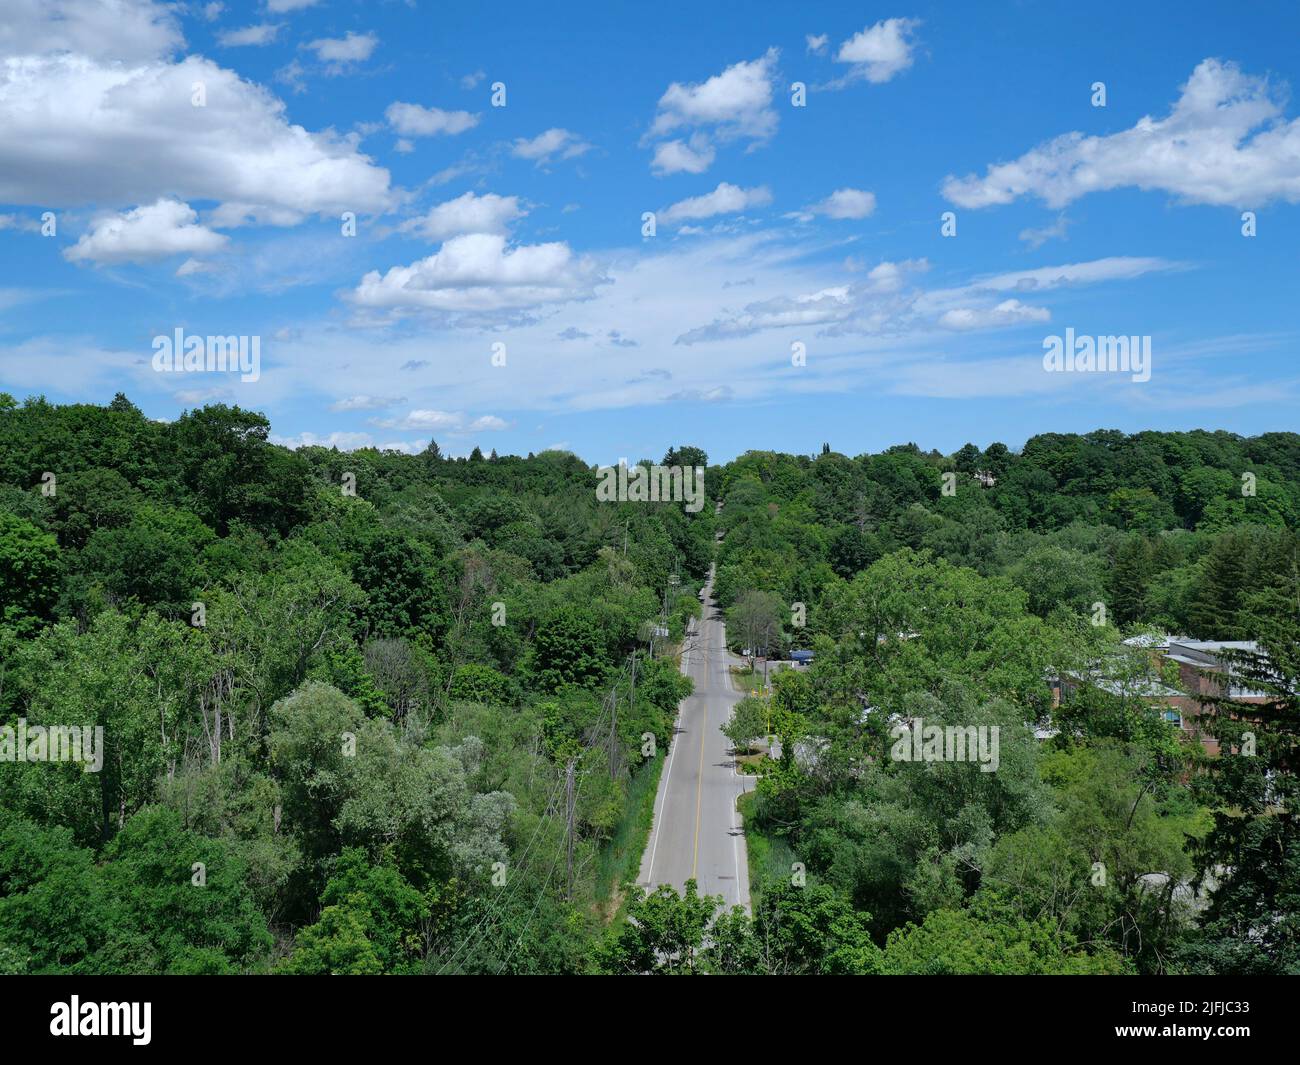 Looking down from a bridge onto a two lane valley road surrounded by trees Stock Photo